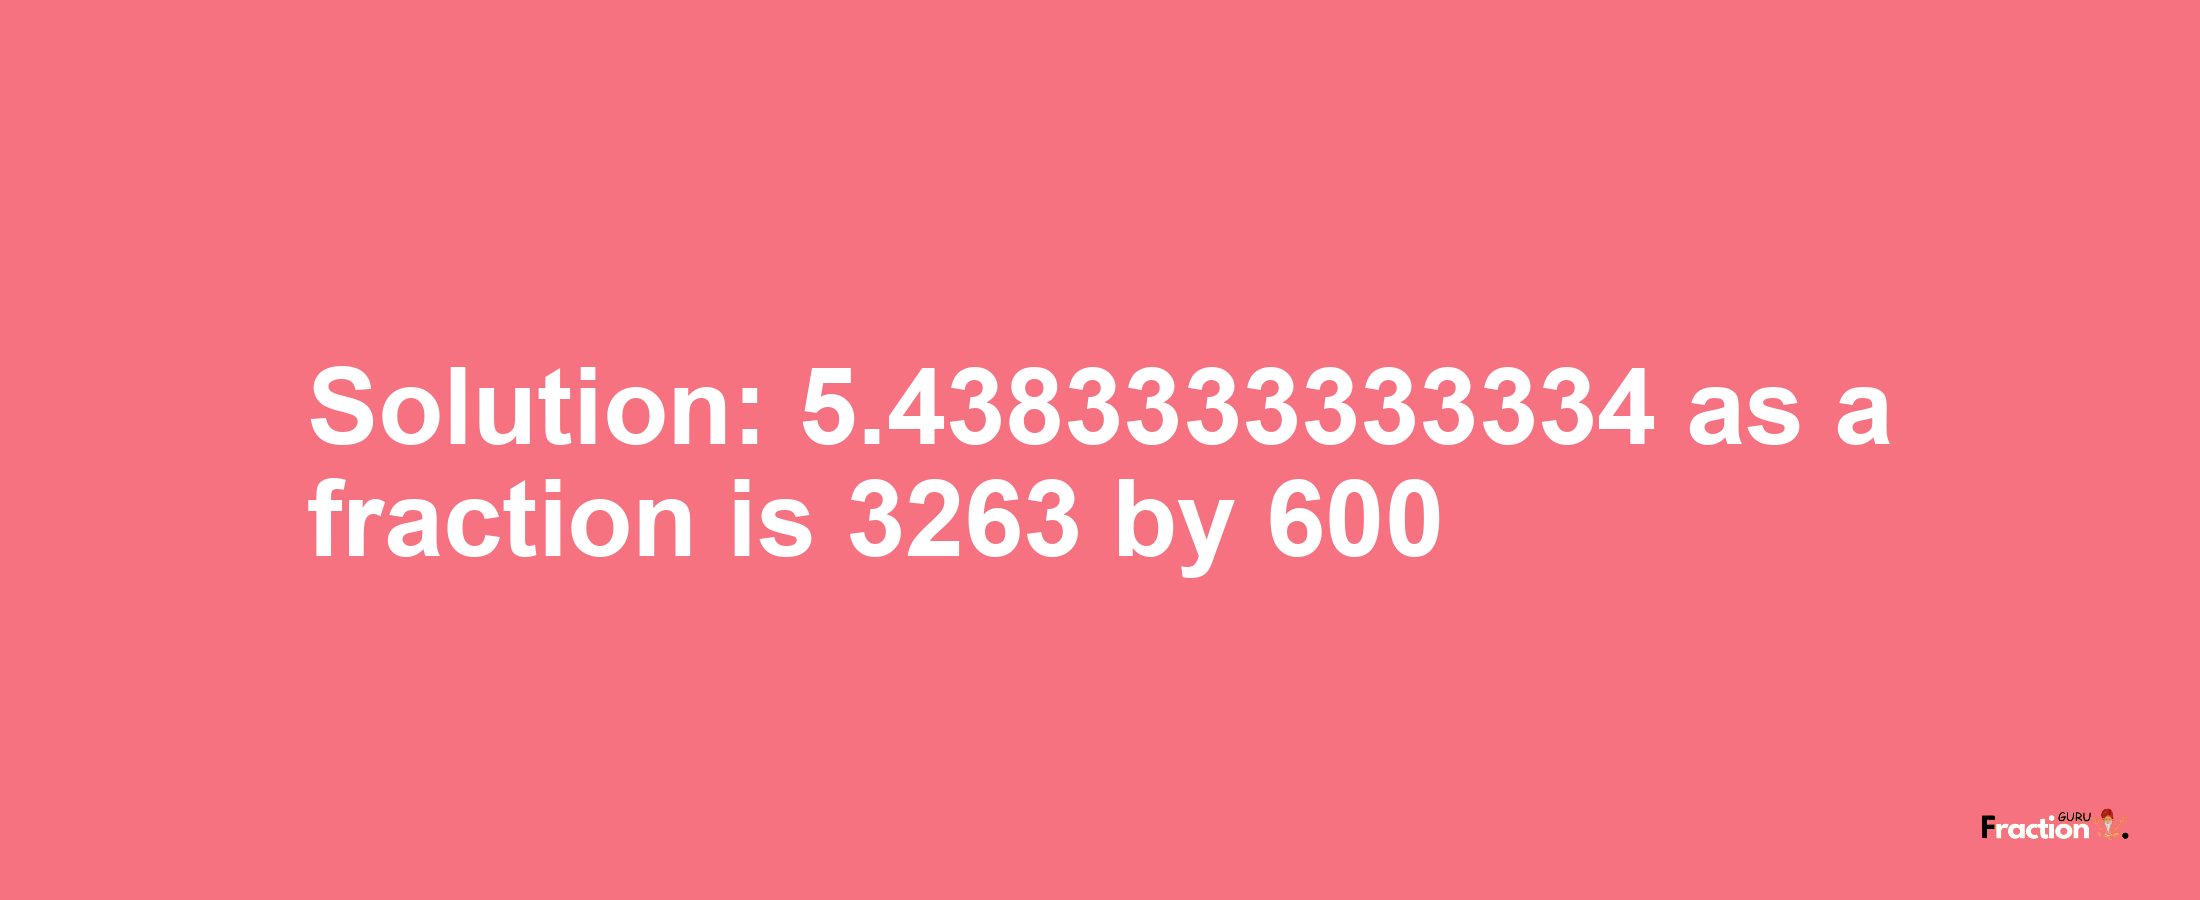 Solution:5.4383333333334 as a fraction is 3263/600